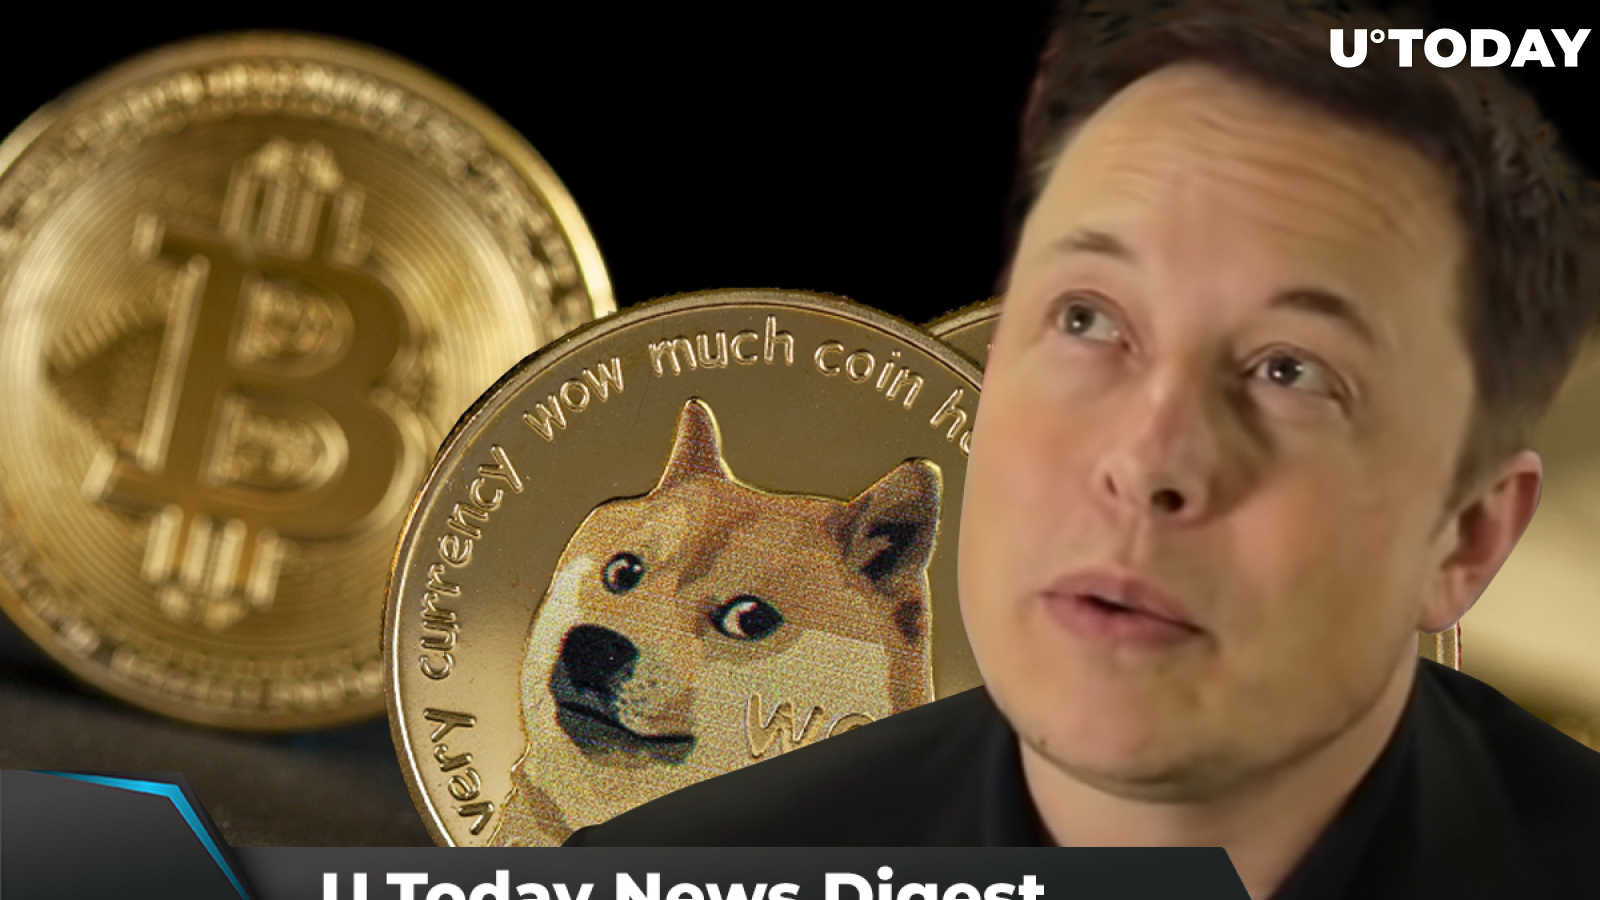 Elon Musk Fails to Boost Prices of Canine Coins, Bitcoin’s Hashrate Spikes, Grayscale Releases Report on Cardano: Crypto News Digest by U.Today